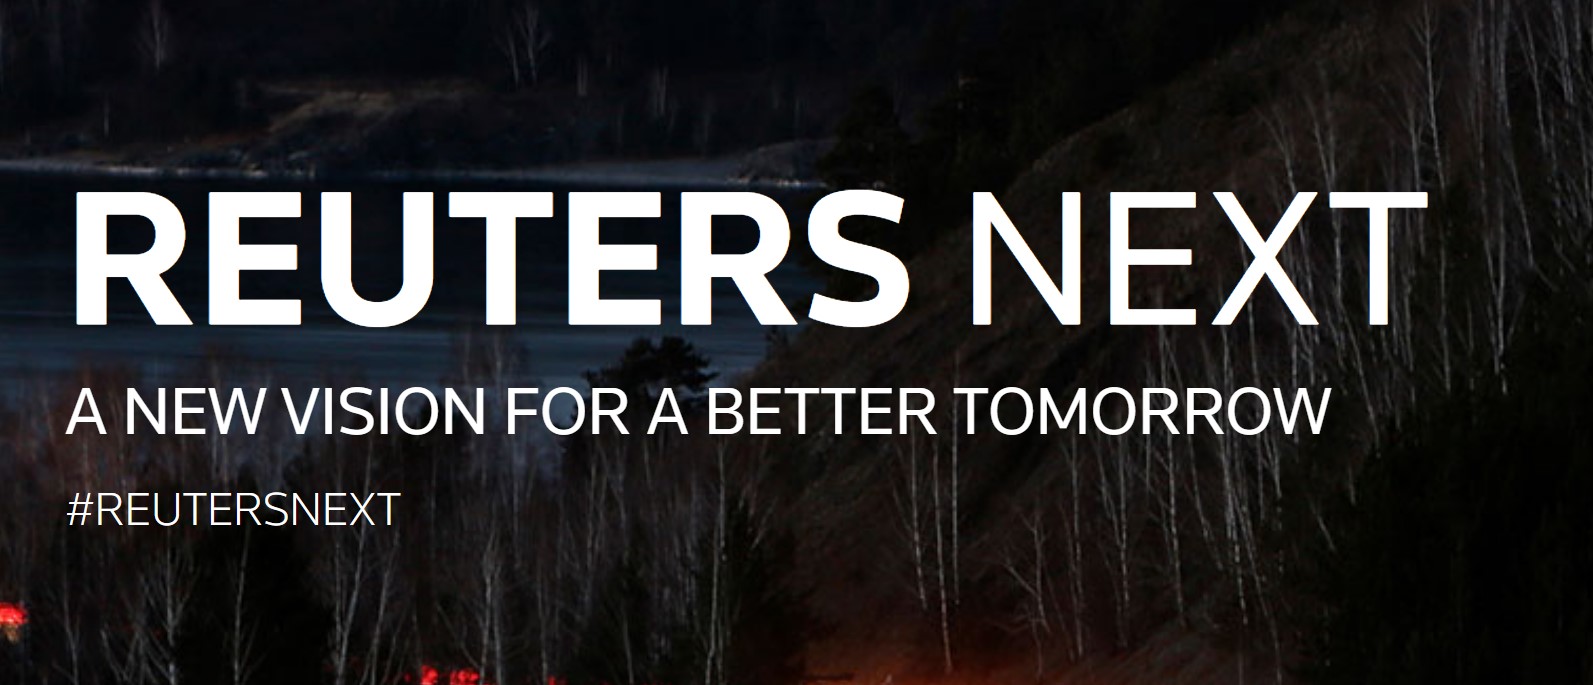 Reuters Next Returns With Over 150 World Leaders to Discuss the Most Critical Issues of Our Age